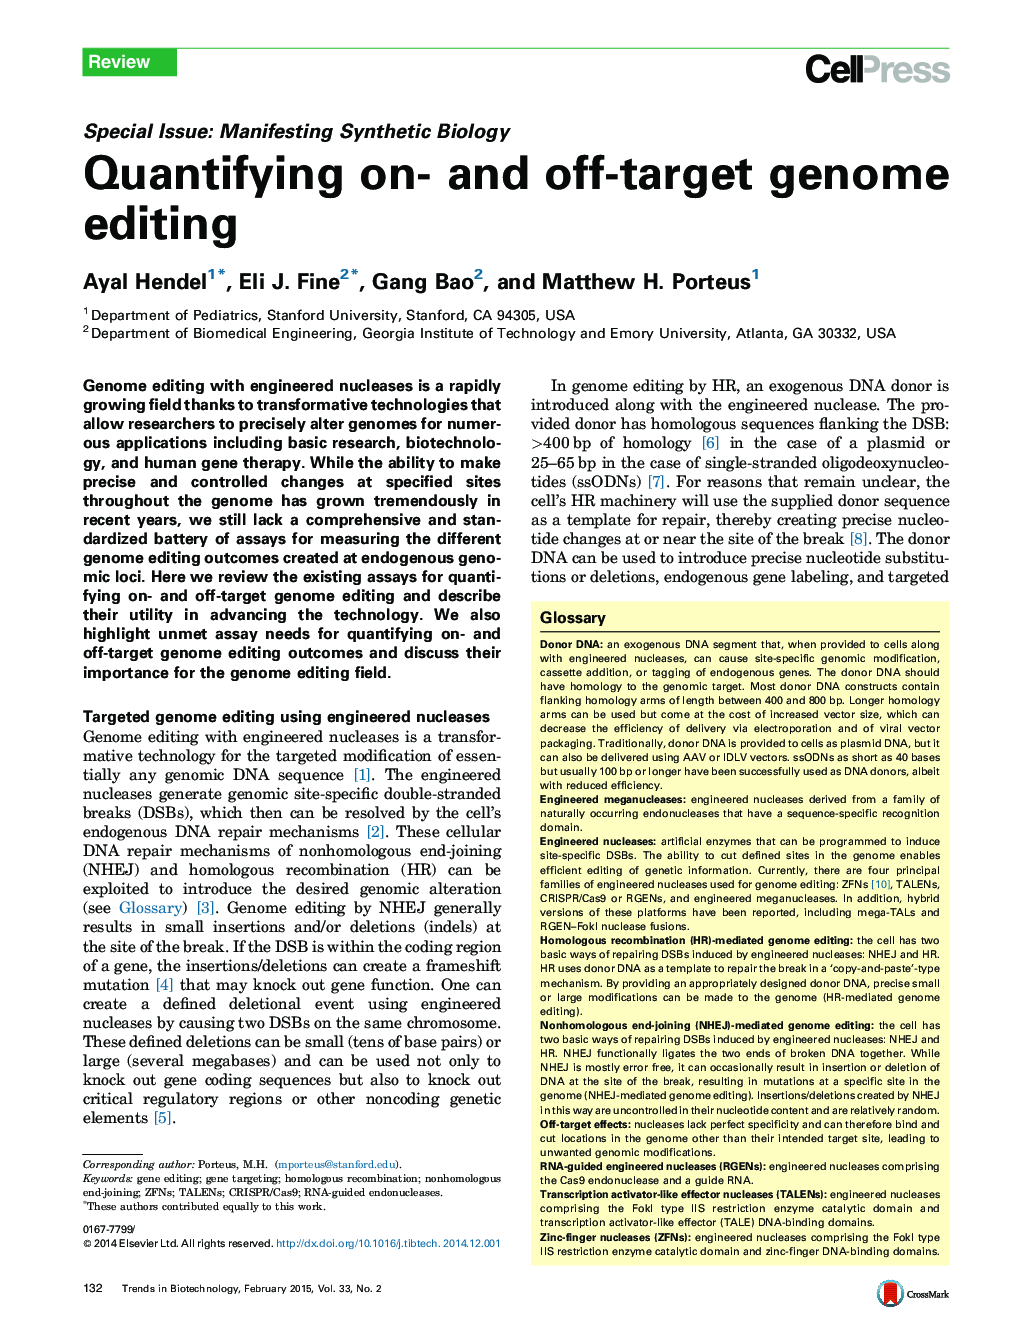 Quantifying on- and off-target genome editing